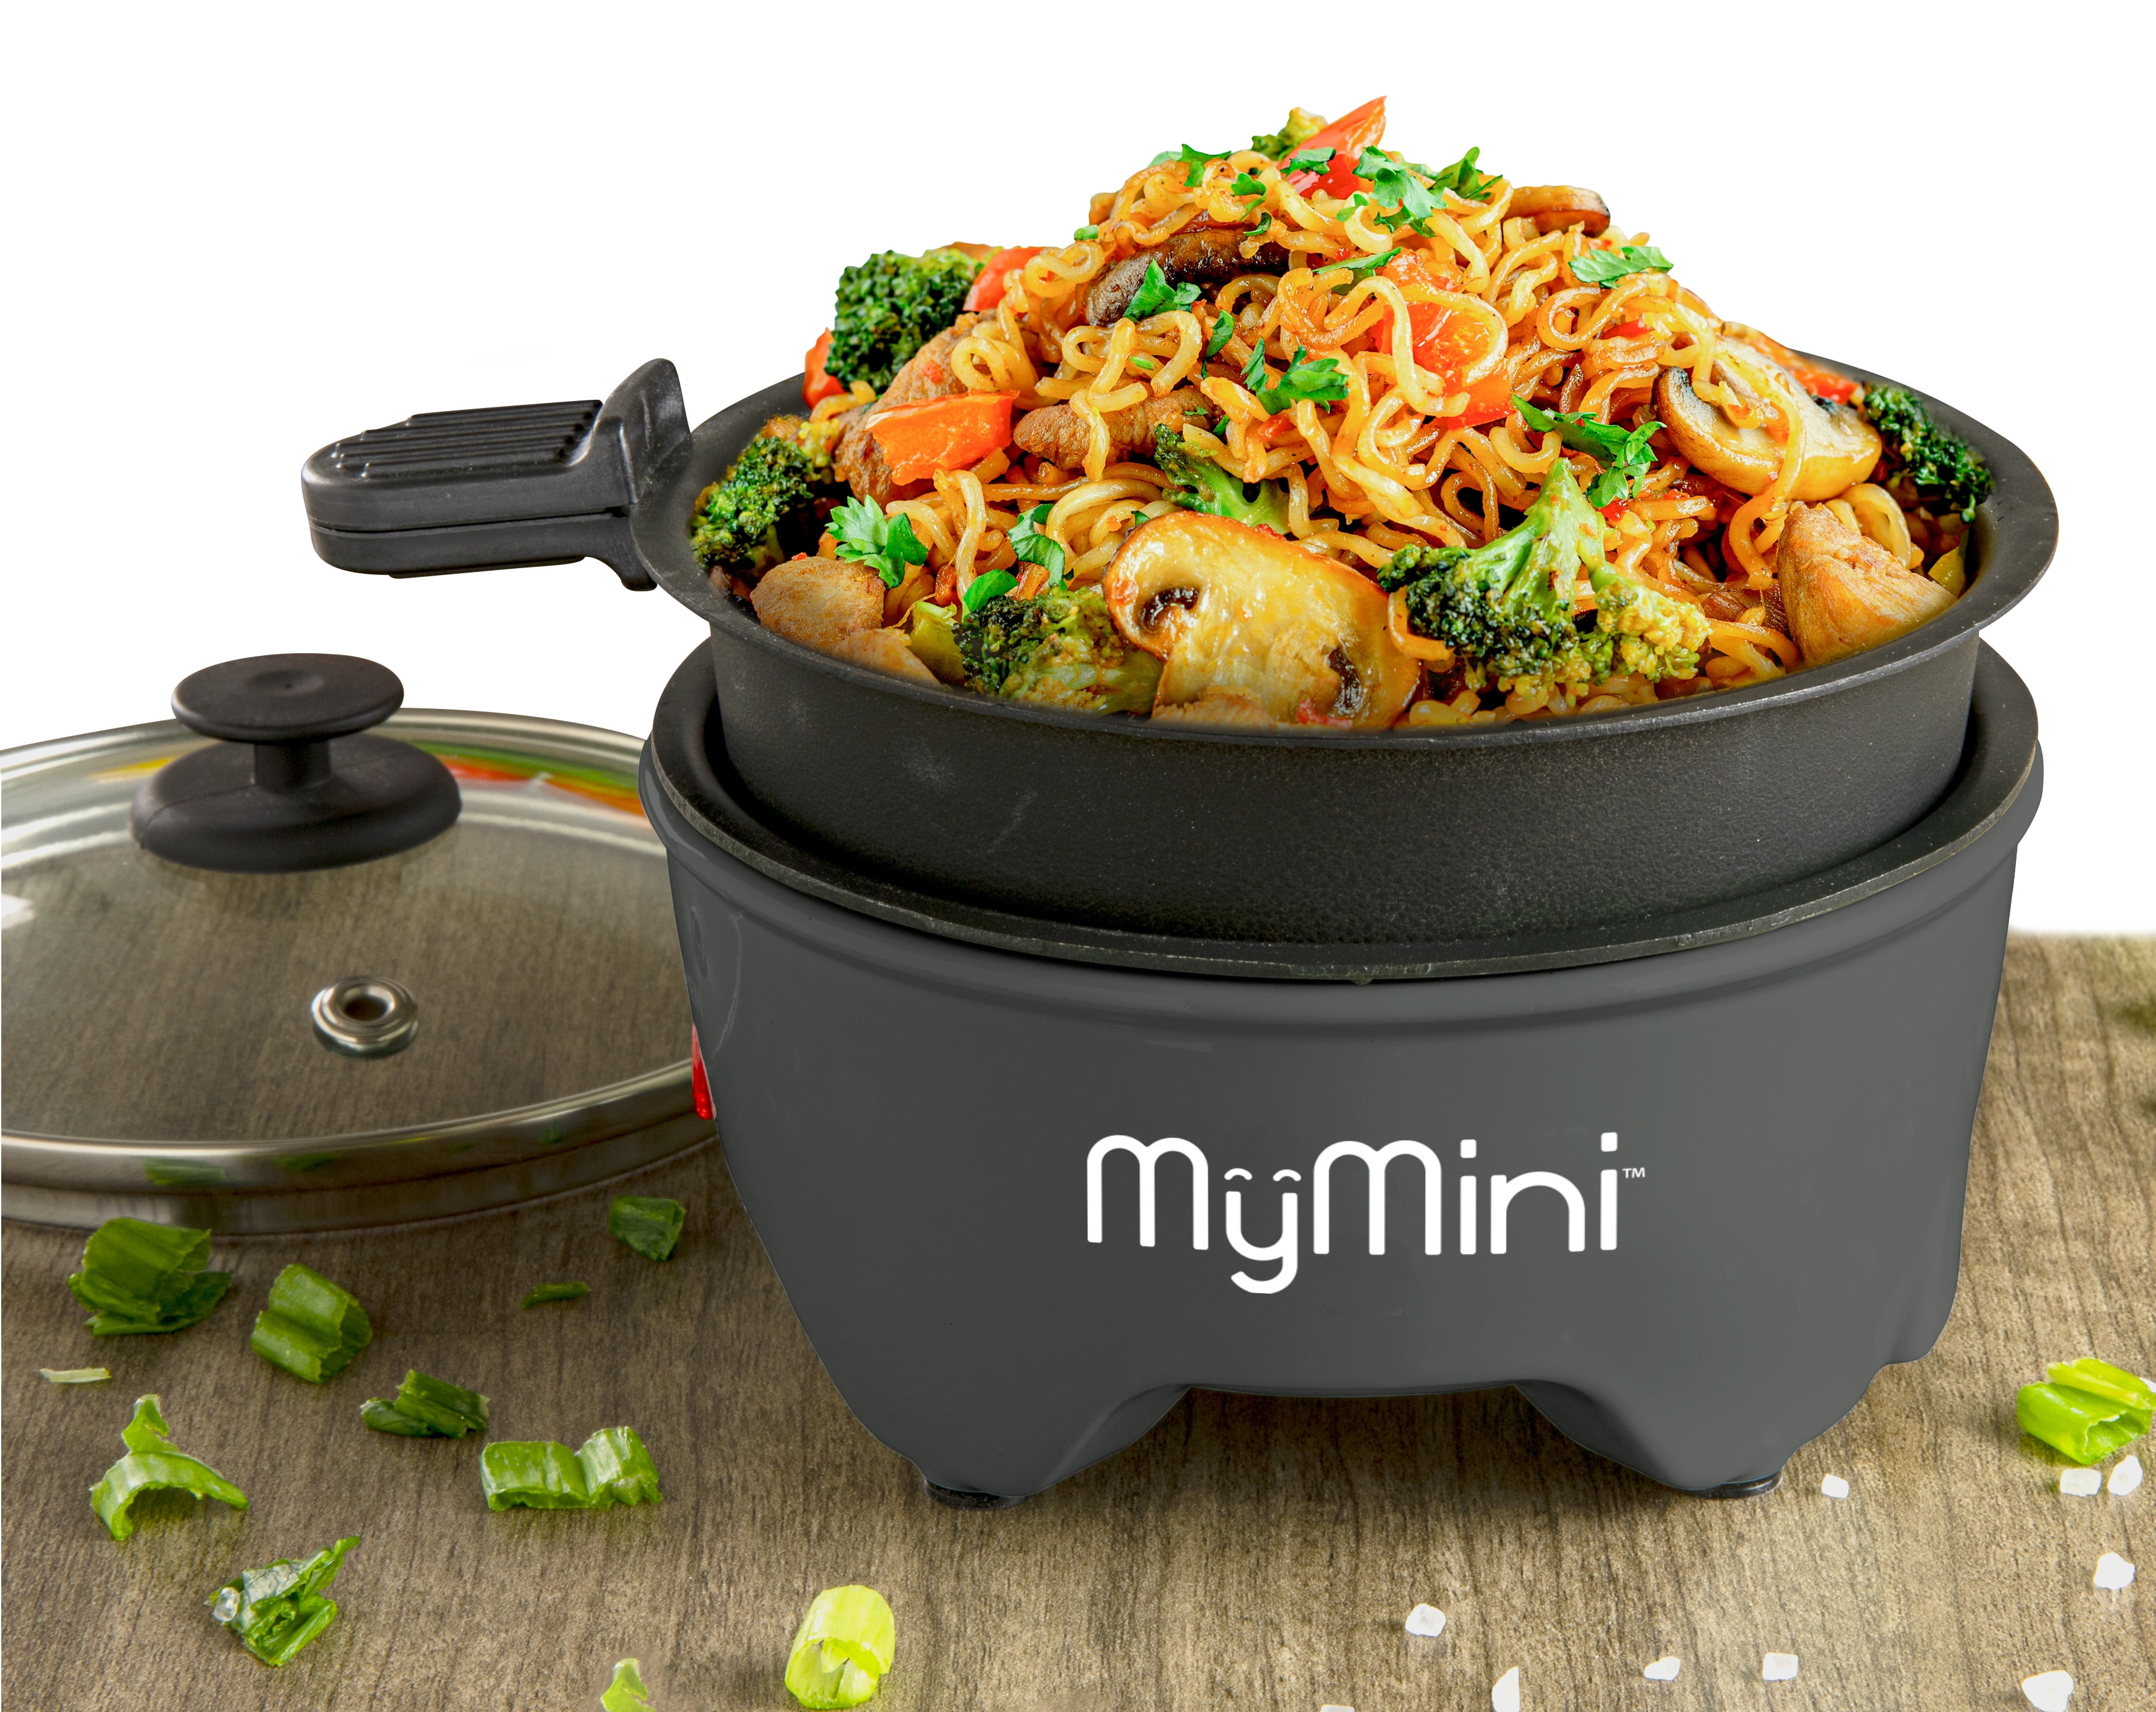 mgmini noodle cooker and skillet｜TikTok Search